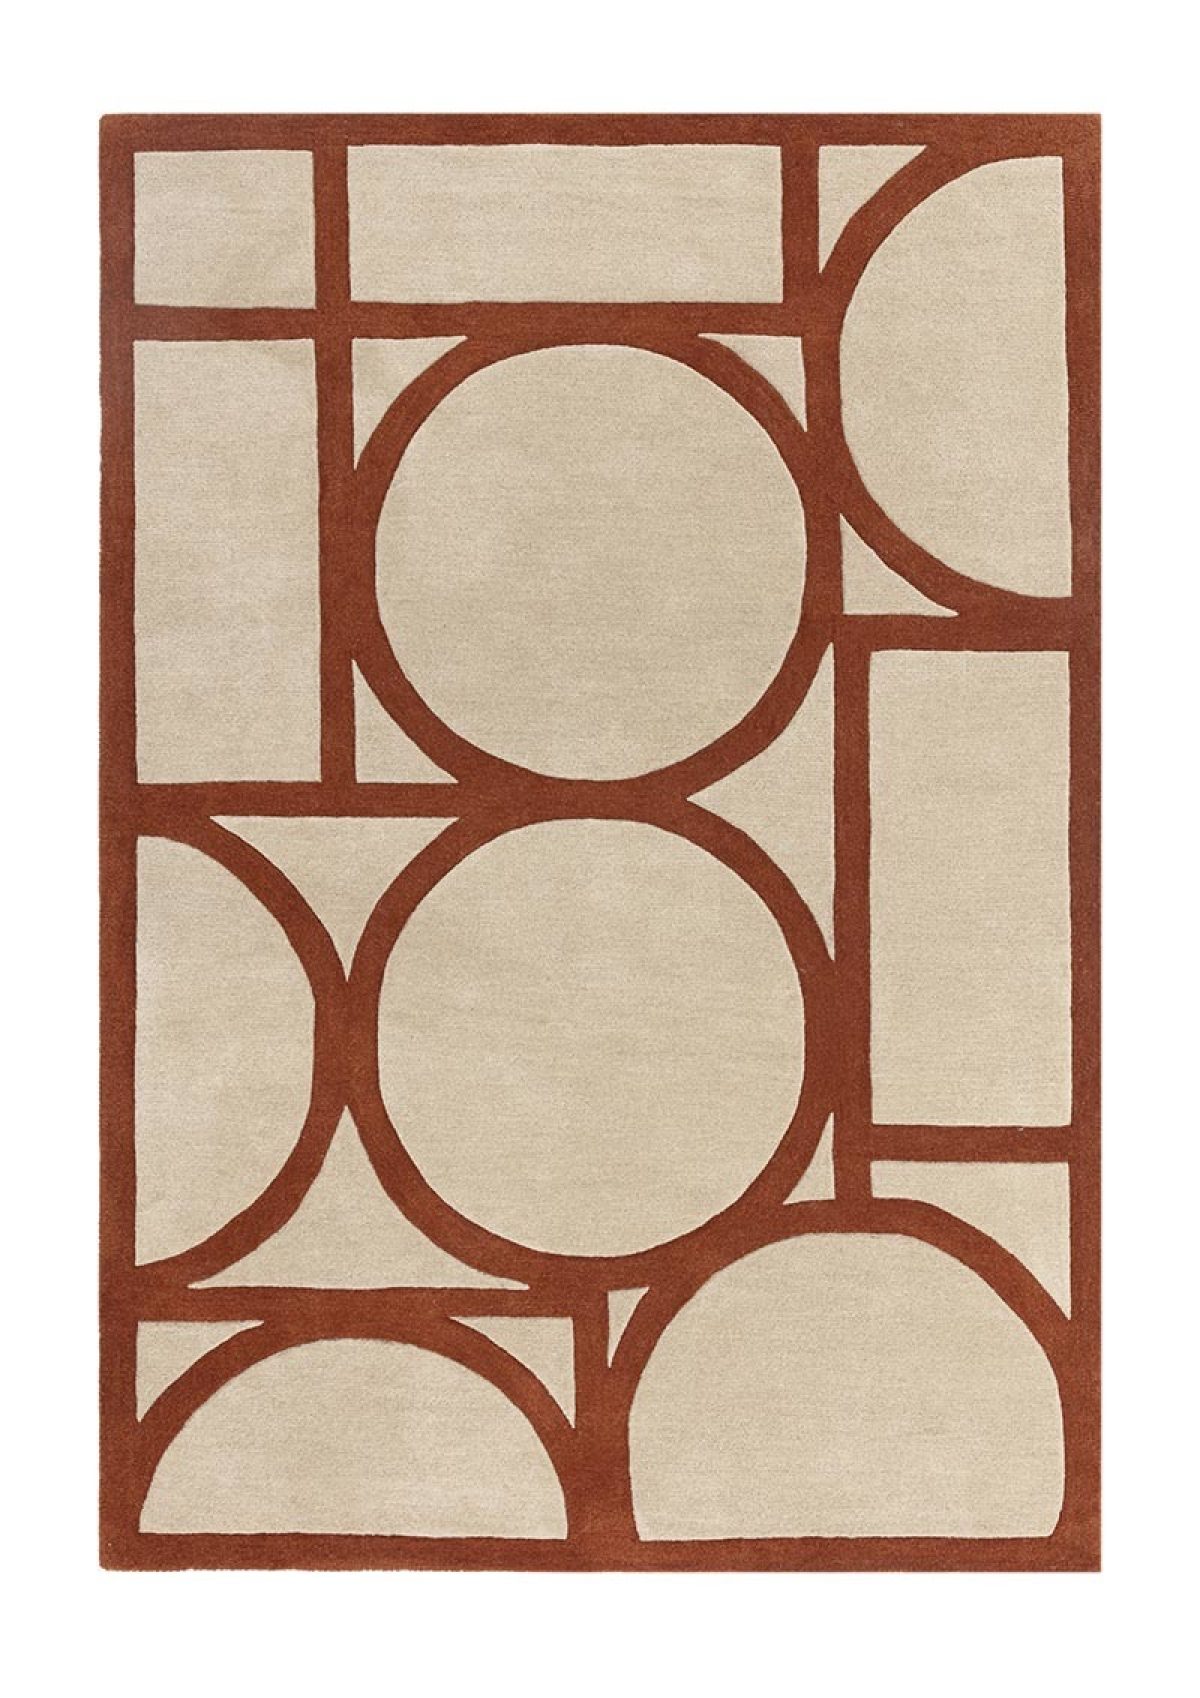 From the living room to the bedroom, this rust coloured rug compliments any space.